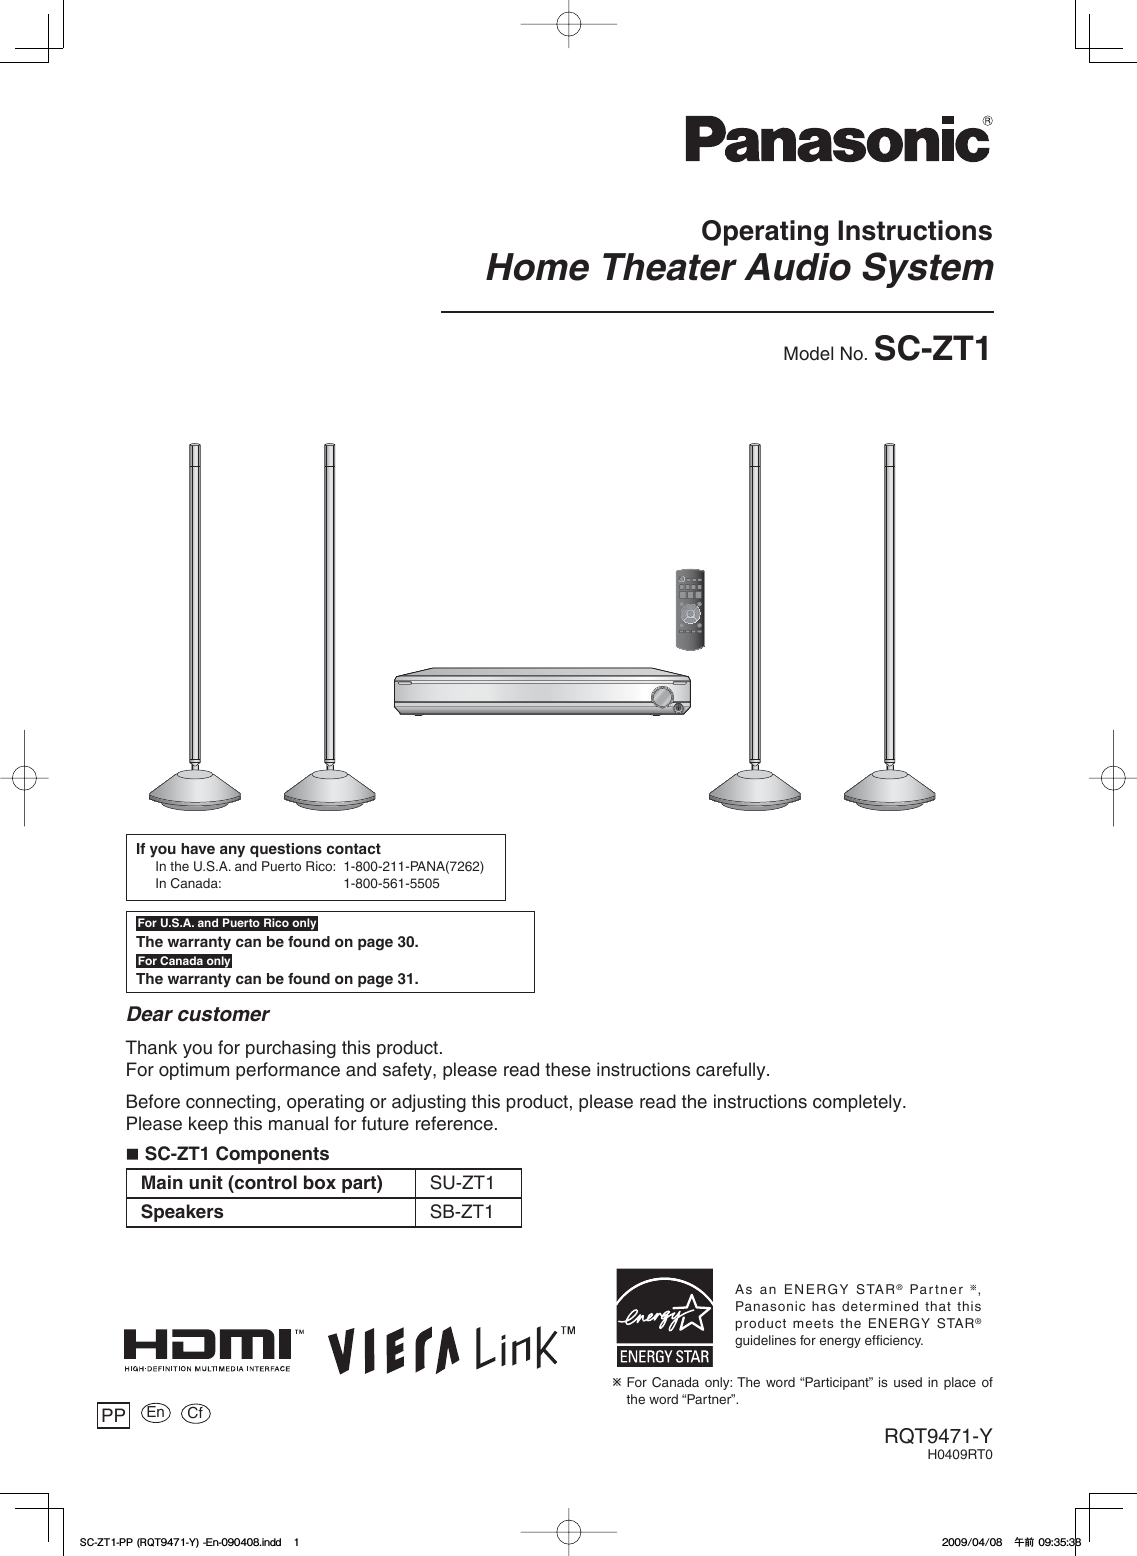 Operating InstructionsHome Theater Audio SystemModel No. SC-ZT1RQT9471-YH0409RT0Dear customerThank you for purchasing this product.For optimum performance and safety, please read these instructions carefully.Before connecting, operating or adjusting this product, please read the instructions completely.Please keep this manual for future reference.PPFor U.S.A. and Puerto Rico onlyThe warranty can be found on page 30.For Canada onlyThe warranty can be found on page 31.If you have any questions contactIn the U.S.A. and Puerto Rico:  1-800-211-PANA(7262)In Canada:  1-800-561-5505As an ENERGY STAR® Partner  ,Panasonic has determined that this product meets the ENERGY STAR®guidelines for energy efficiency.Ú For Canada only: The word “Participant” is used in place of the word “Partner”. En Cf SC-ZT1 ComponentsMain unit (control box part) SU-ZT1Speakers SB-ZT15%&lt;622436;&apos;PKPFF5%&lt;622436;&apos;PKPFFඦ೨ඦ೨